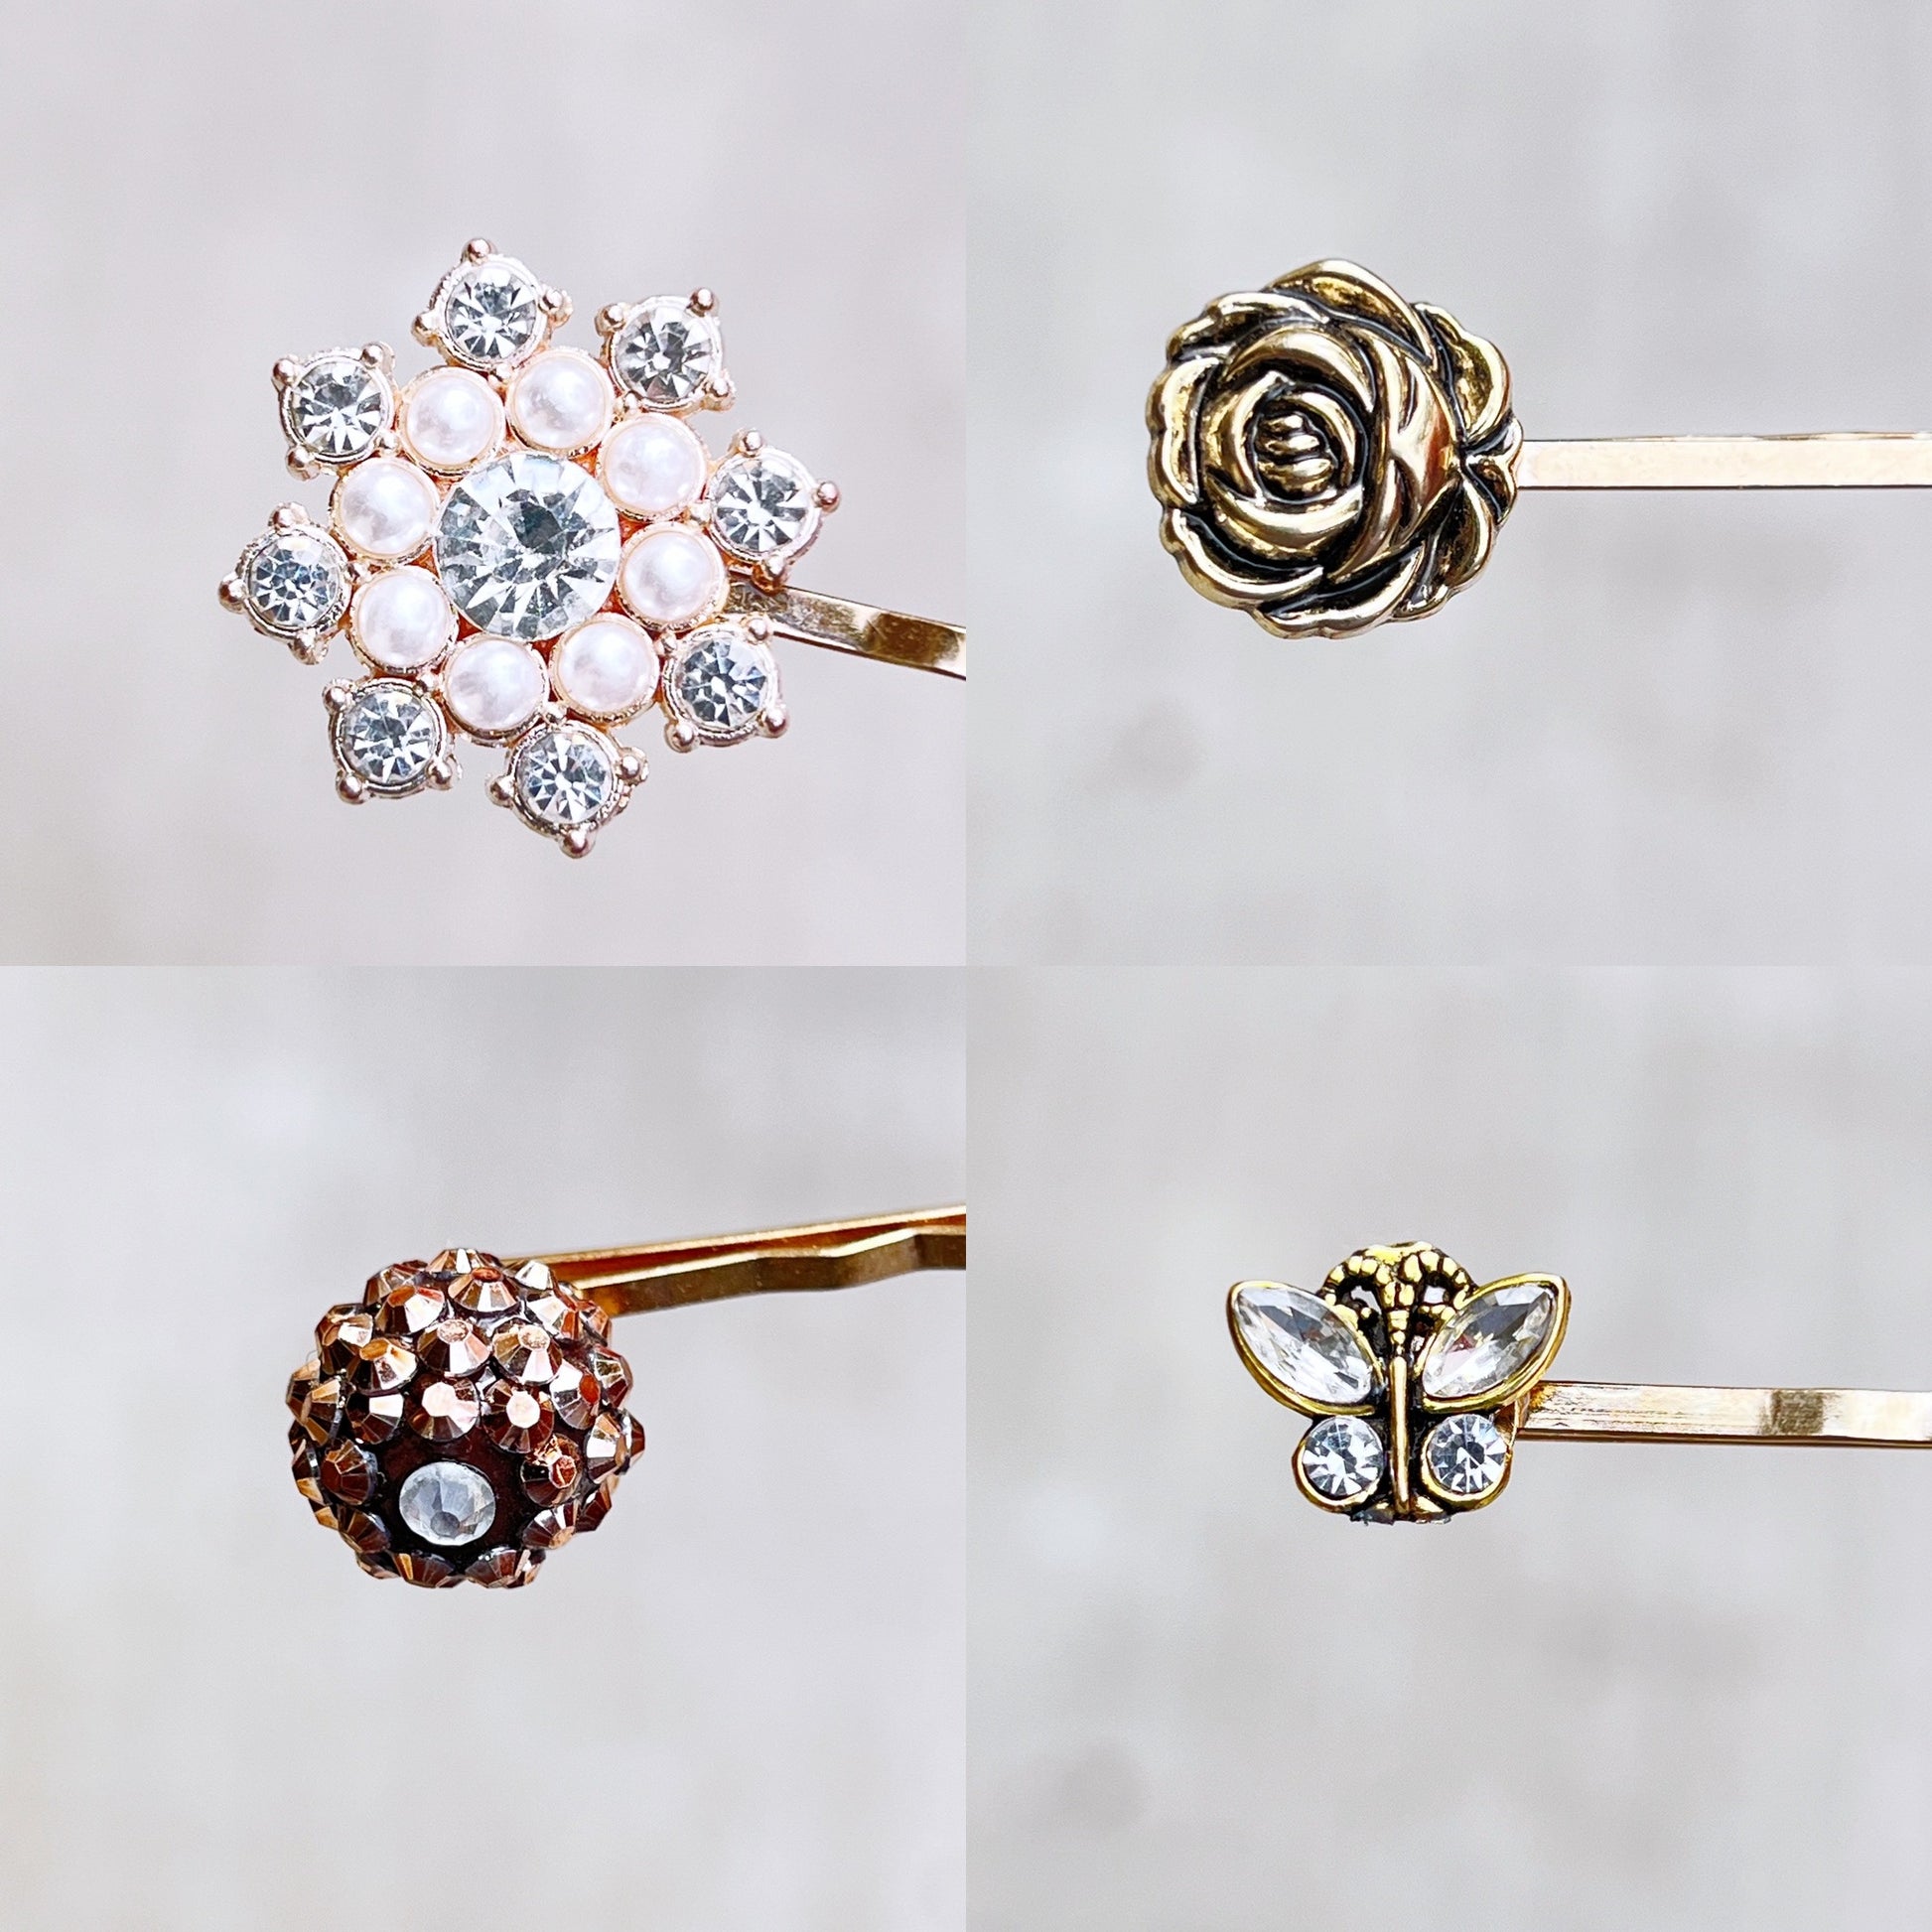 Vintage Inspired Rose Gold Hair Pins: Adorned with Rhinestone Pearls, Flowers, Hearts, & Antiqued Gold Butterflies for Timeless Elegance